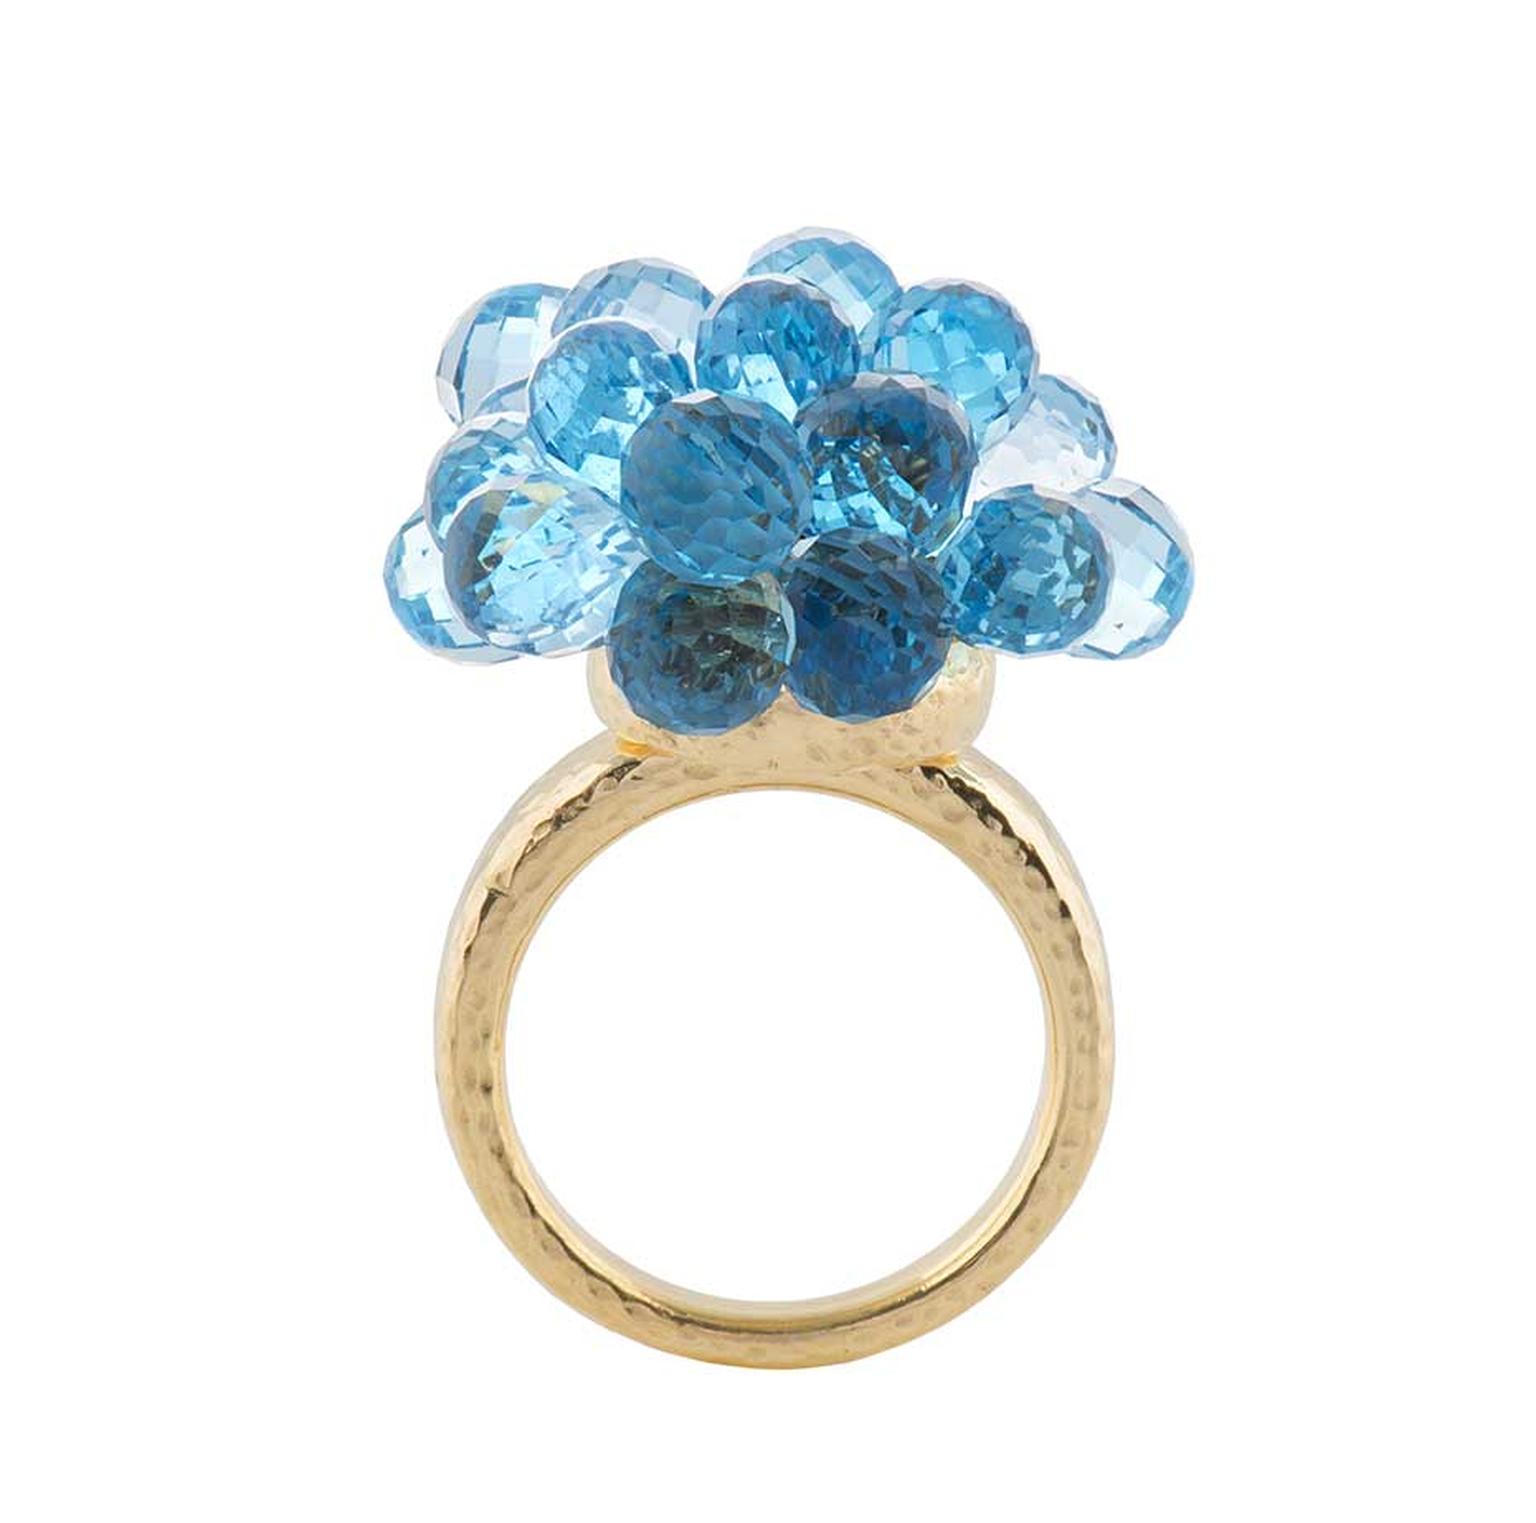 Blue topaz jewellery: the cool November birthstone for a chilly month